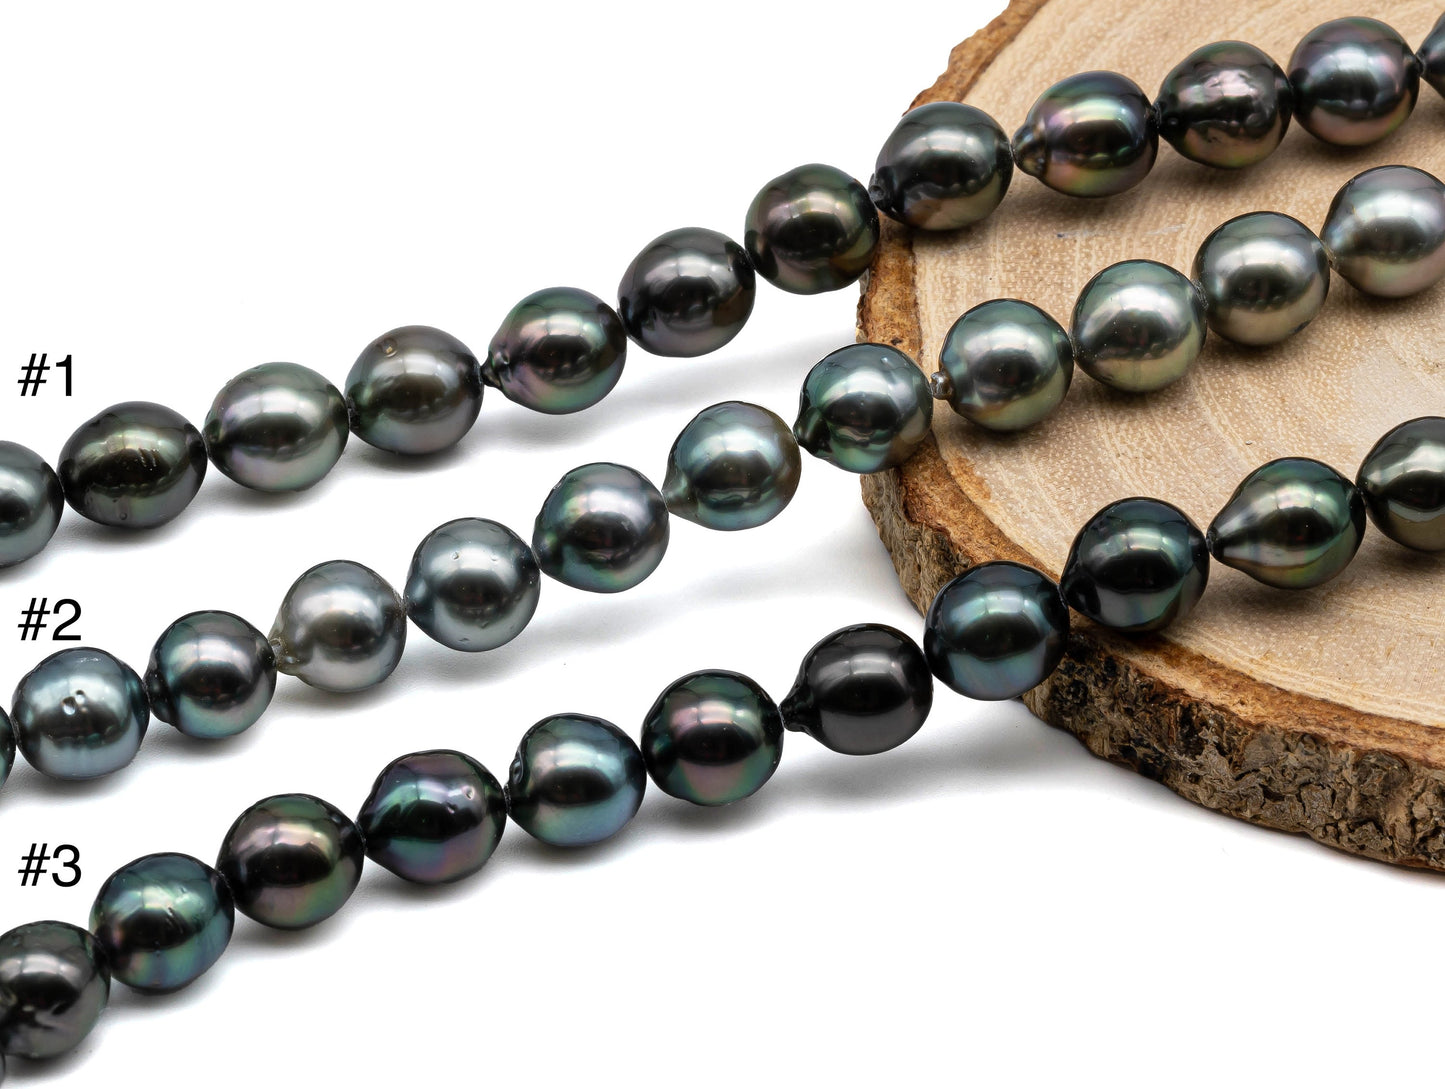 Tahitian Pearl Near Round with Extremely Nice Luster and Limited Blemishes, Full Strand Black Pearl Beads in 8.5-9mm, SKU#1069TH